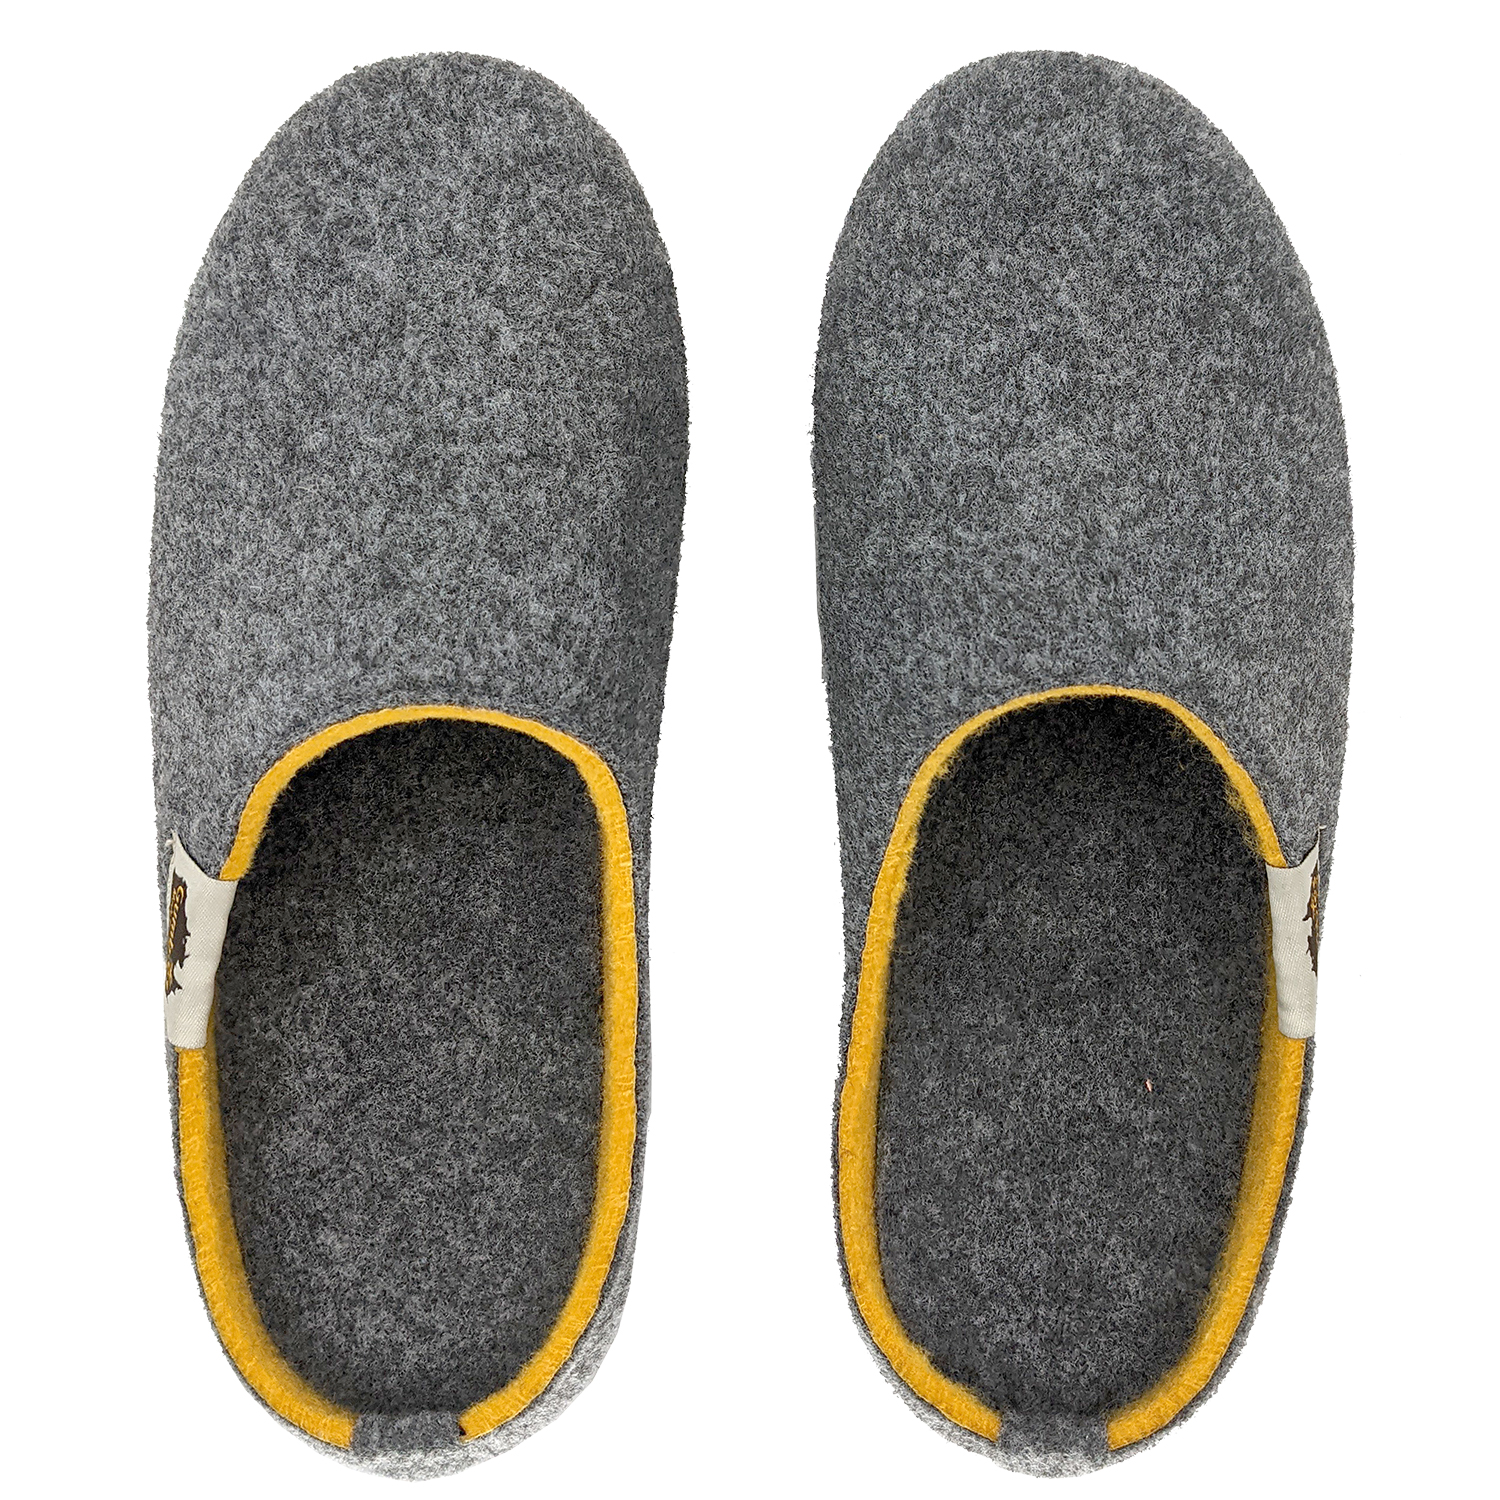 GUMBIES – Outback Slipper, Grey Curry 